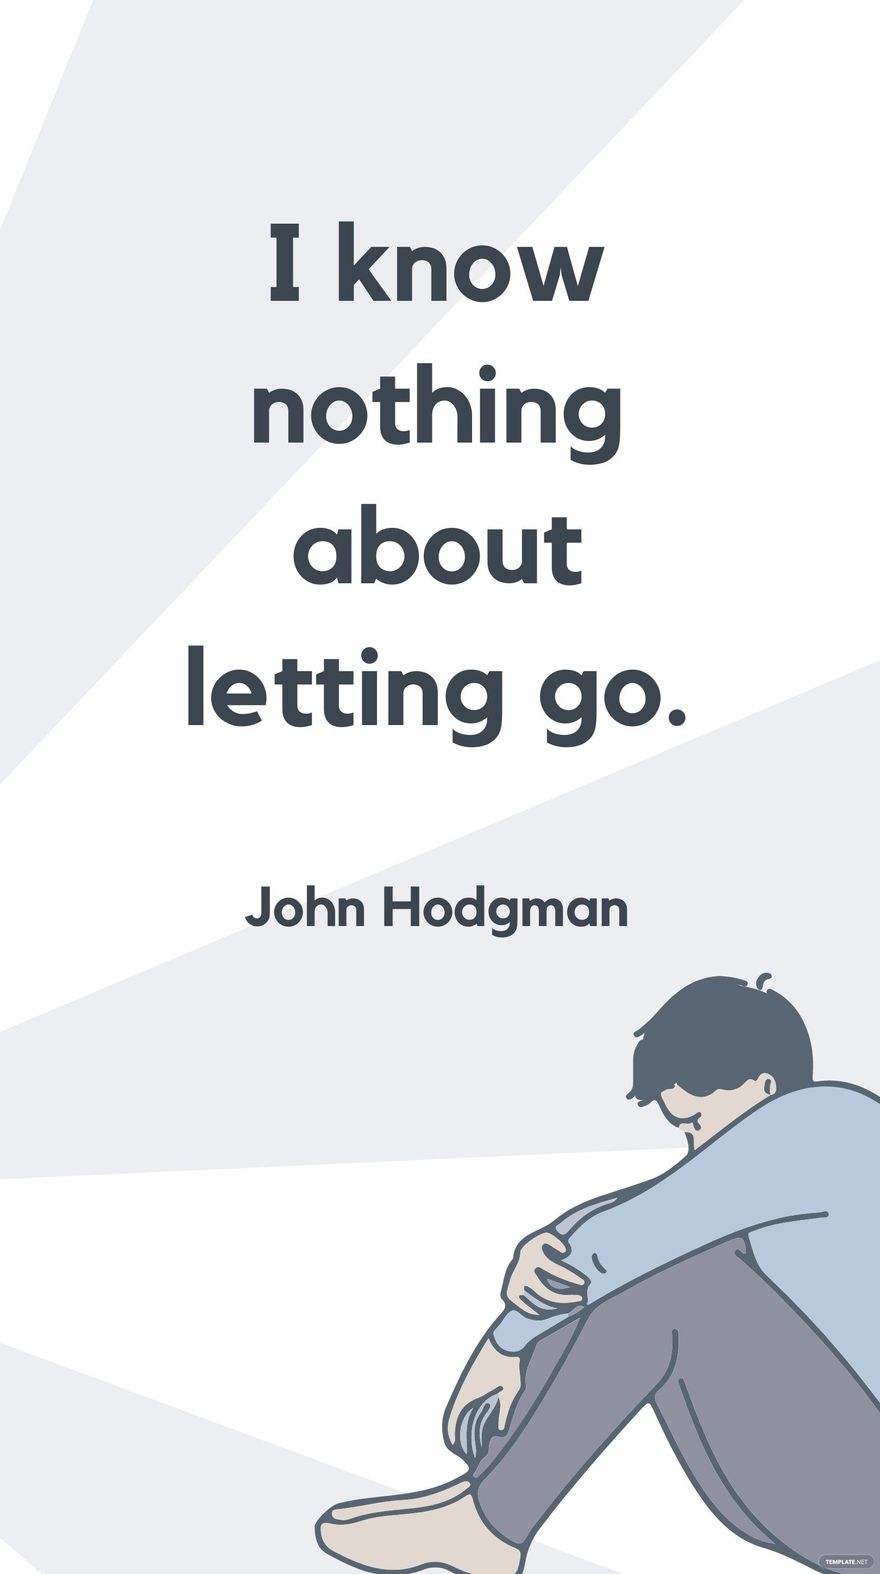 John Hodgman - I know nothing about letting go. in JPG